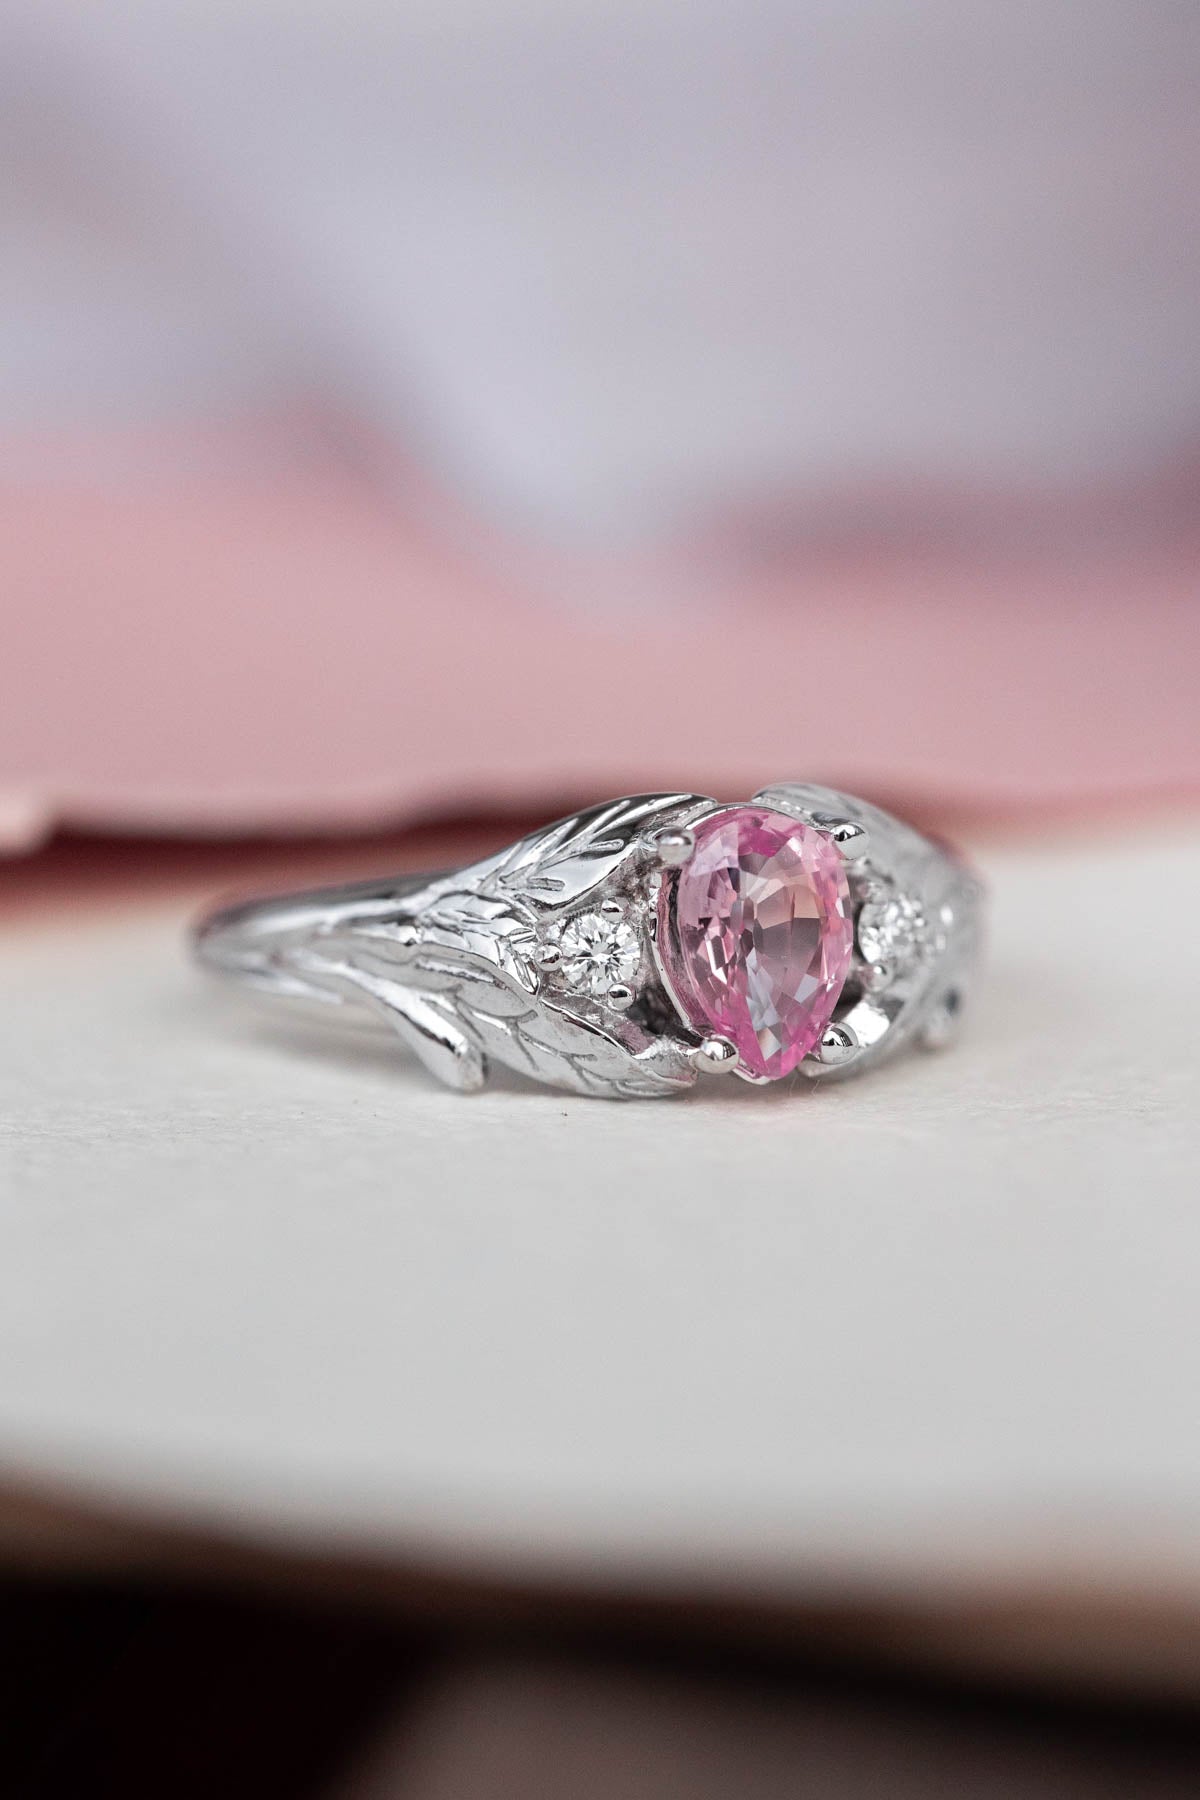 Natural pink sapphire engagement ring, white gold leaf proposal ring with accent diamonds / Wisteria - Eden Garden Jewelry™